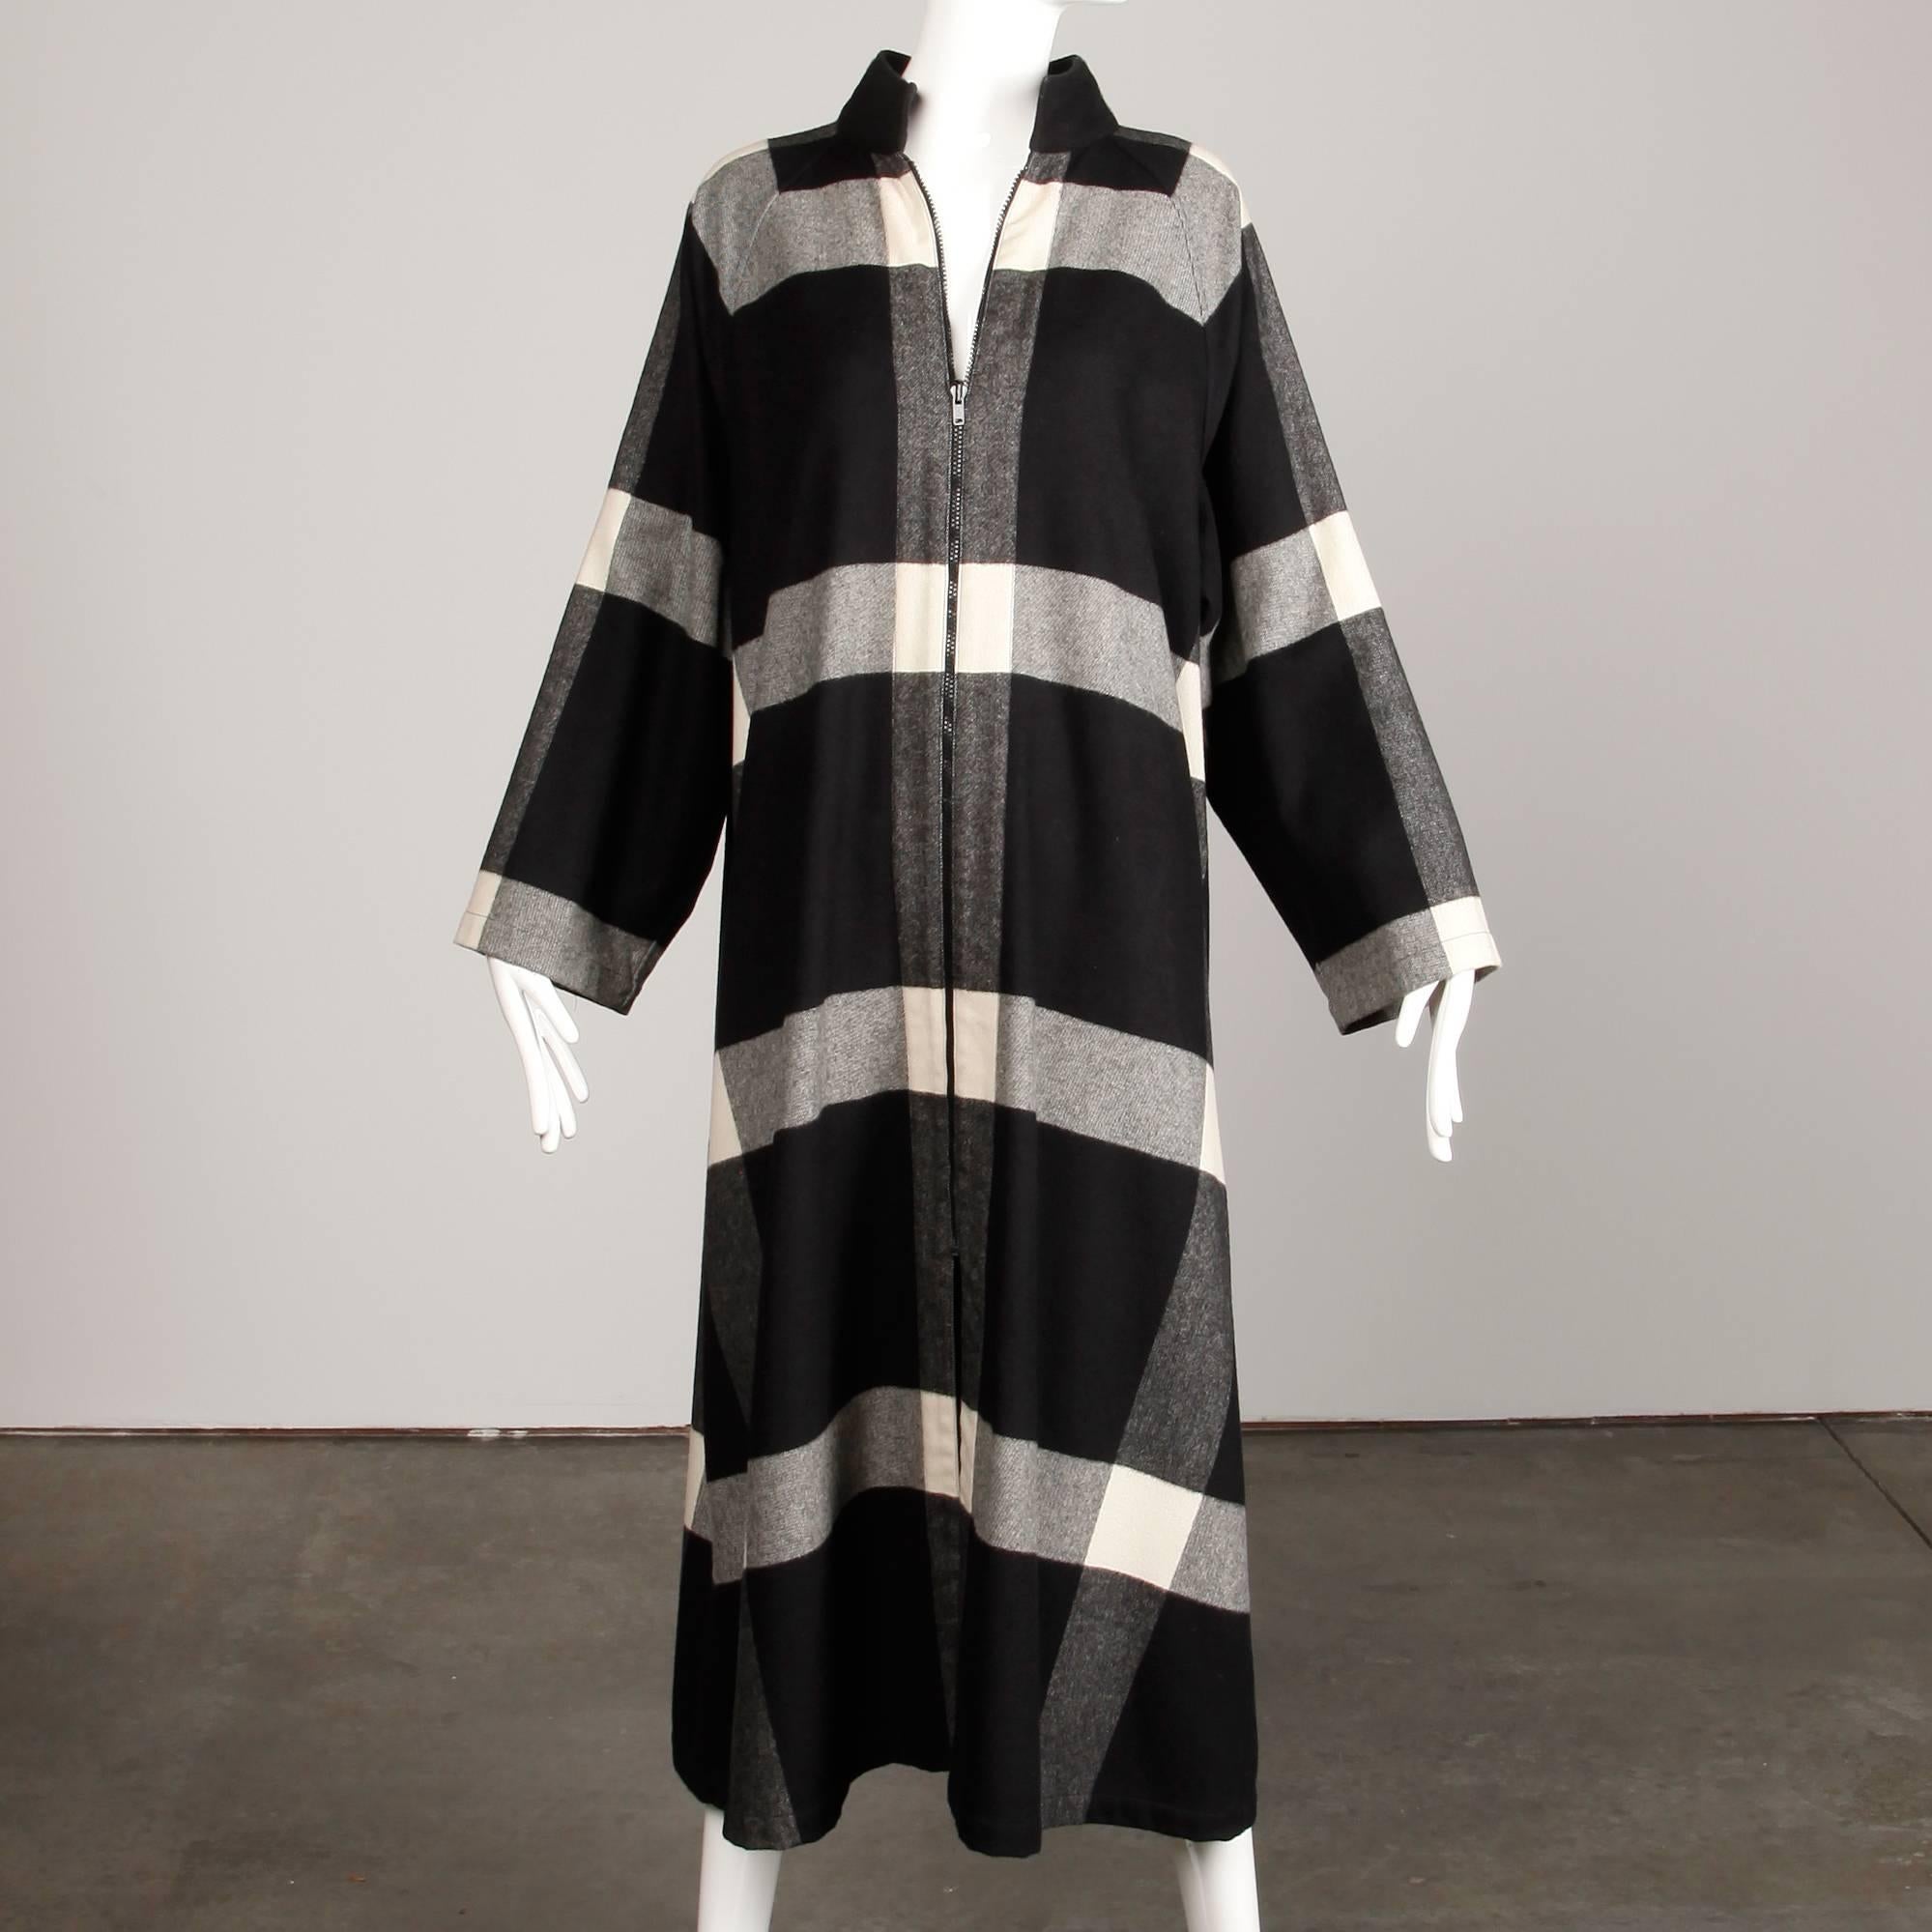 Versatile coat, duster or dress by Michaele Vollbracht in a black and white plaid. Unlined with front zip closure. The marked size is medium. 60% wool, 15% nylon, 15% polyester, 10% cashmere. The marked size is medium, but the oversized fit will